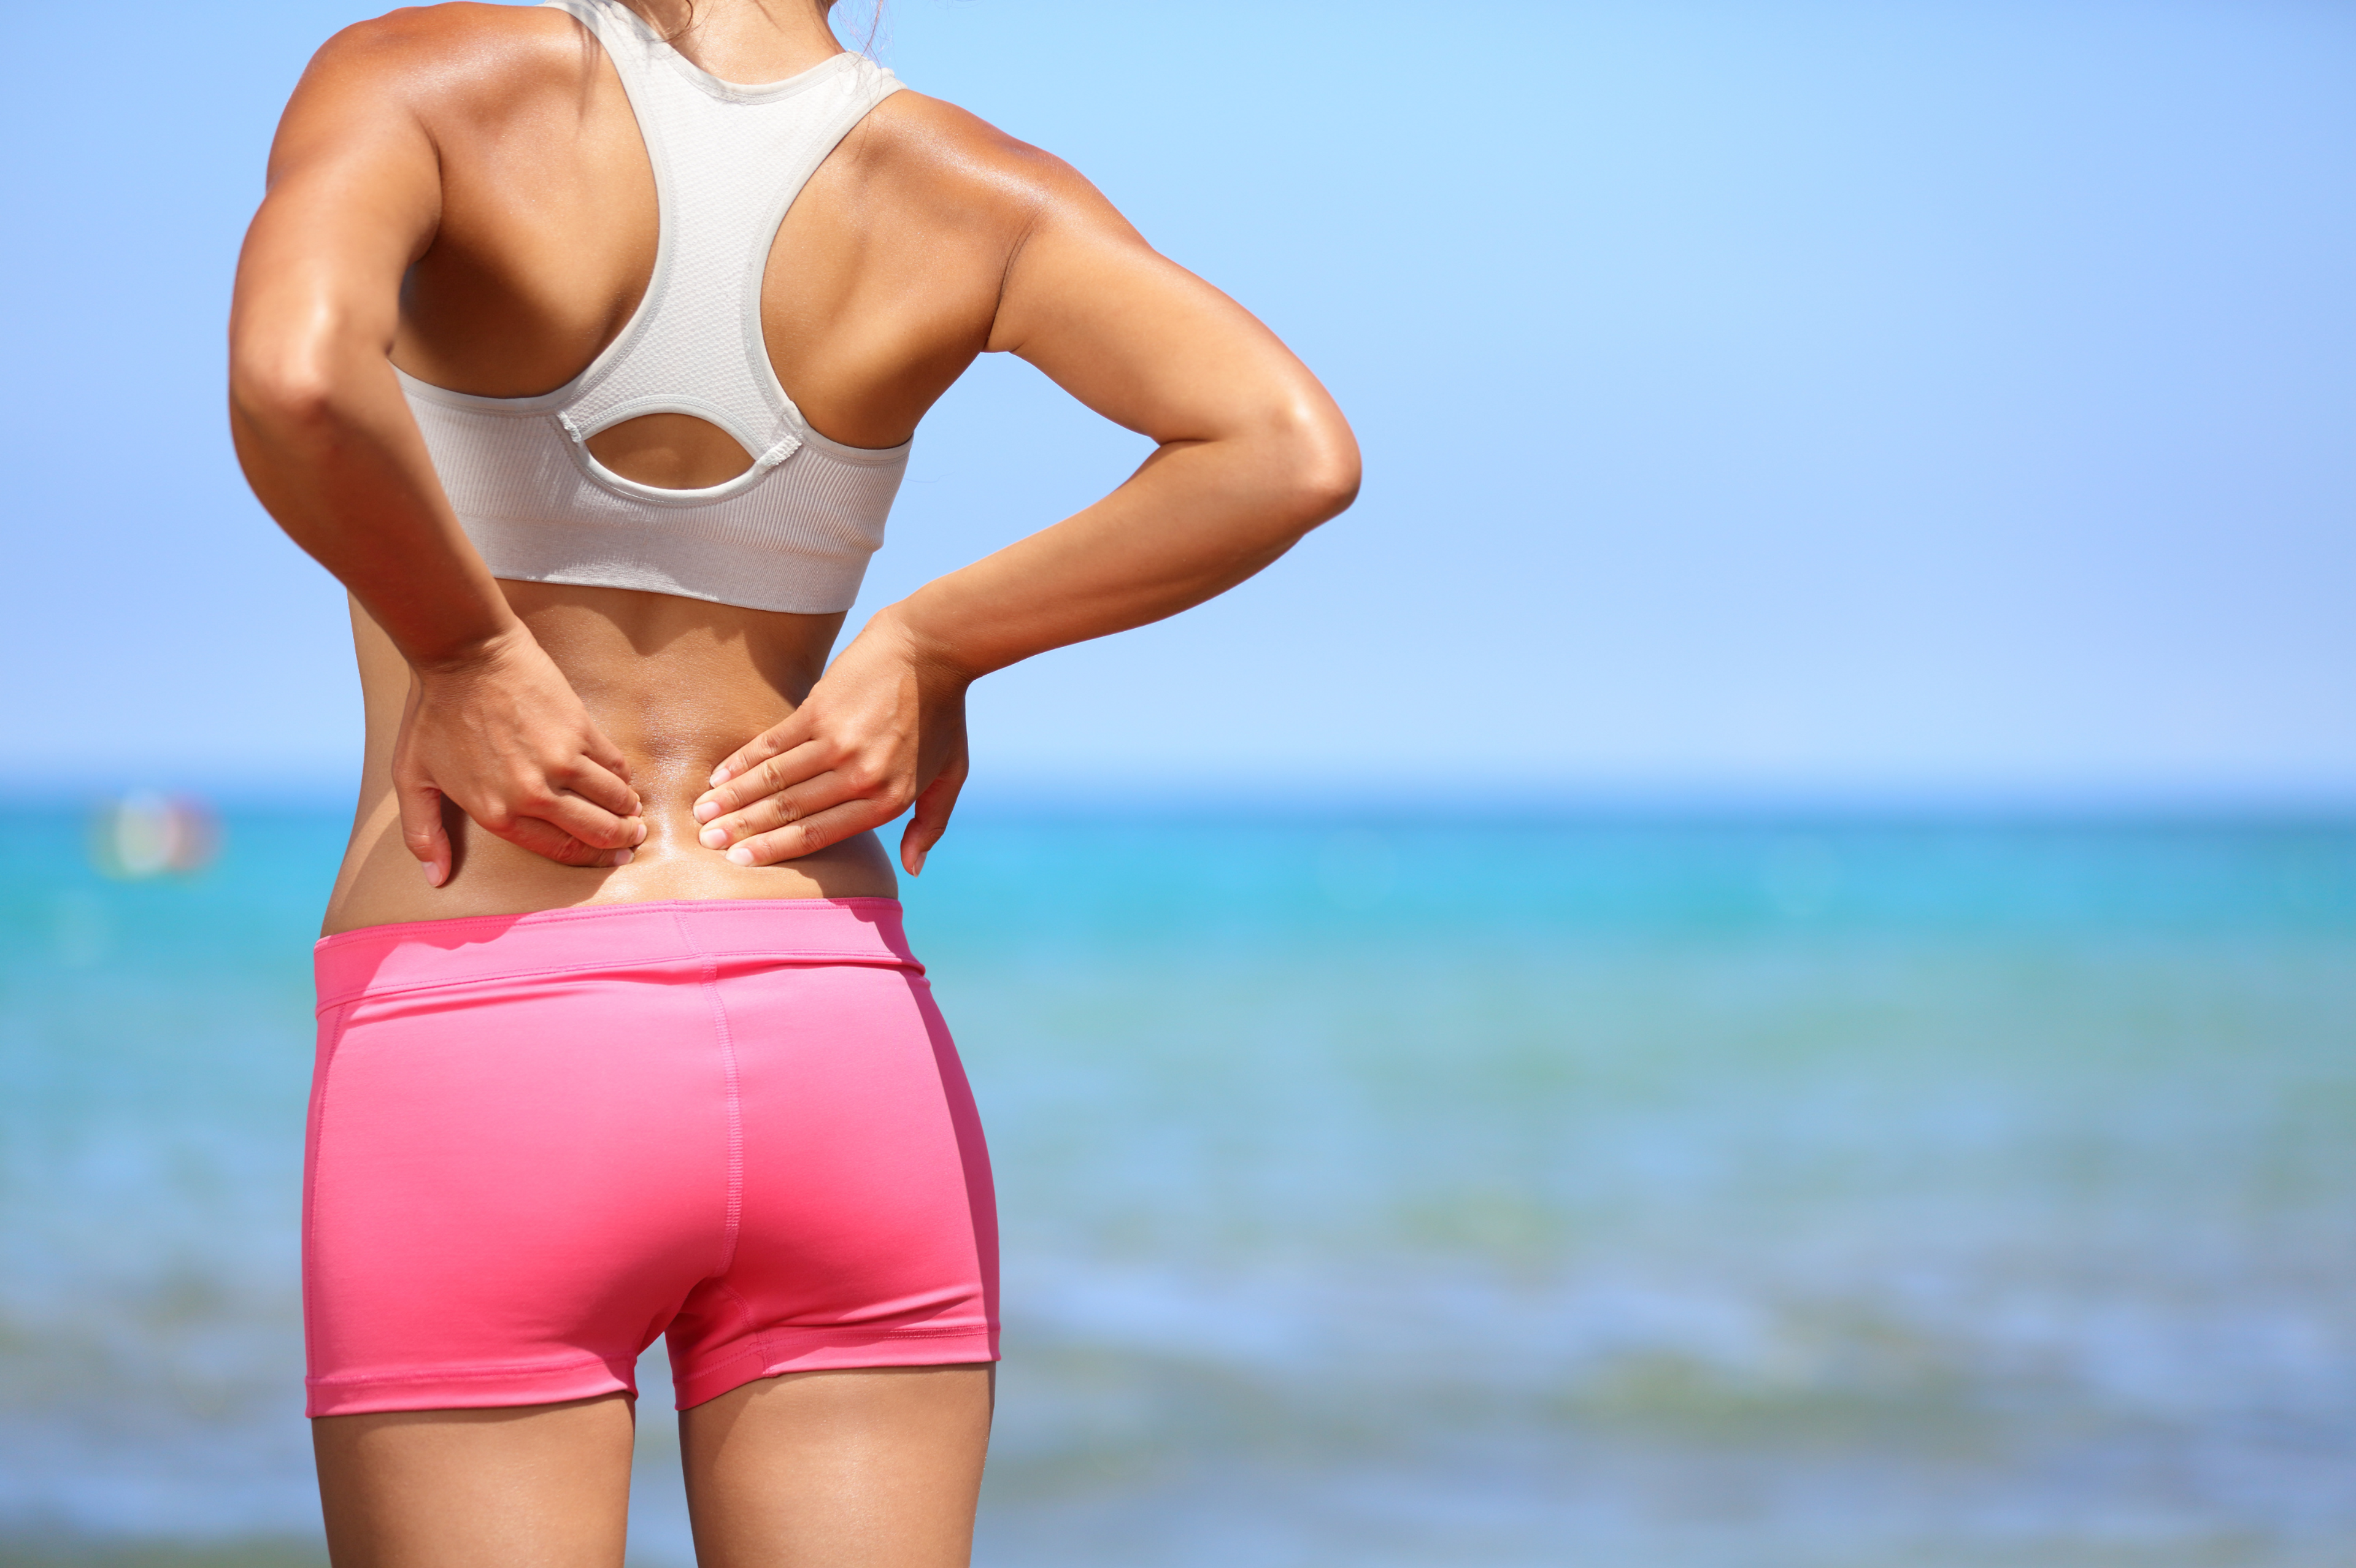 Learn why your back hurts when you run and if you can continue running.